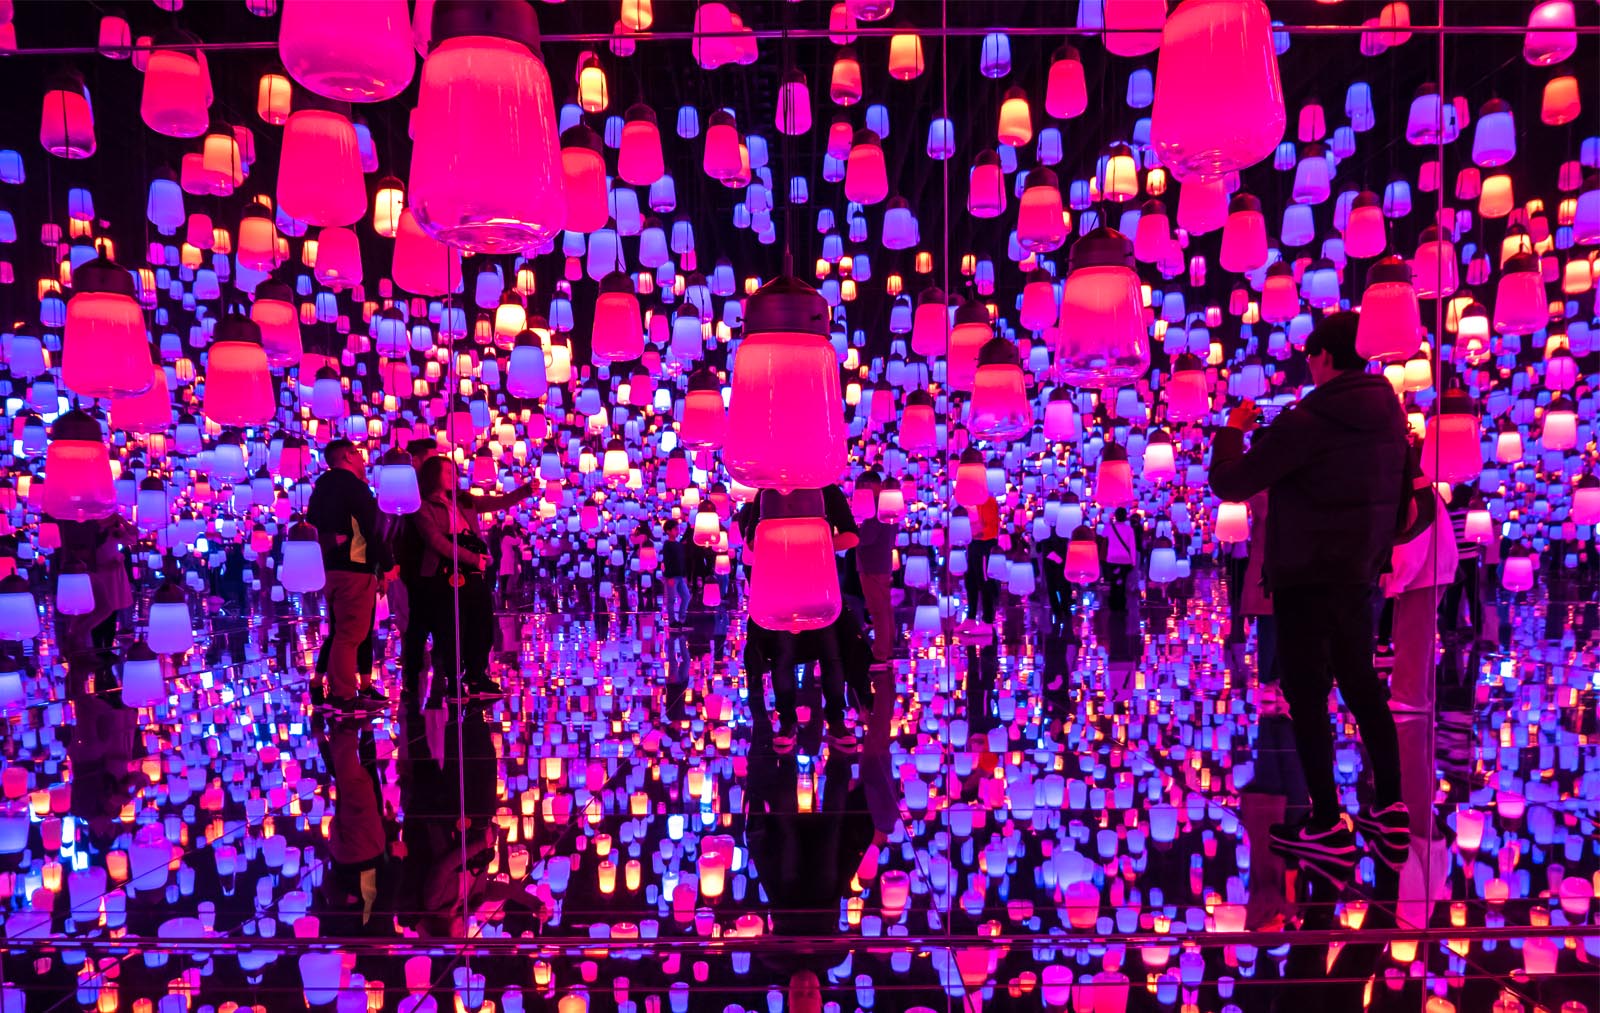 TeamLAB Borderless Forest of Lamps